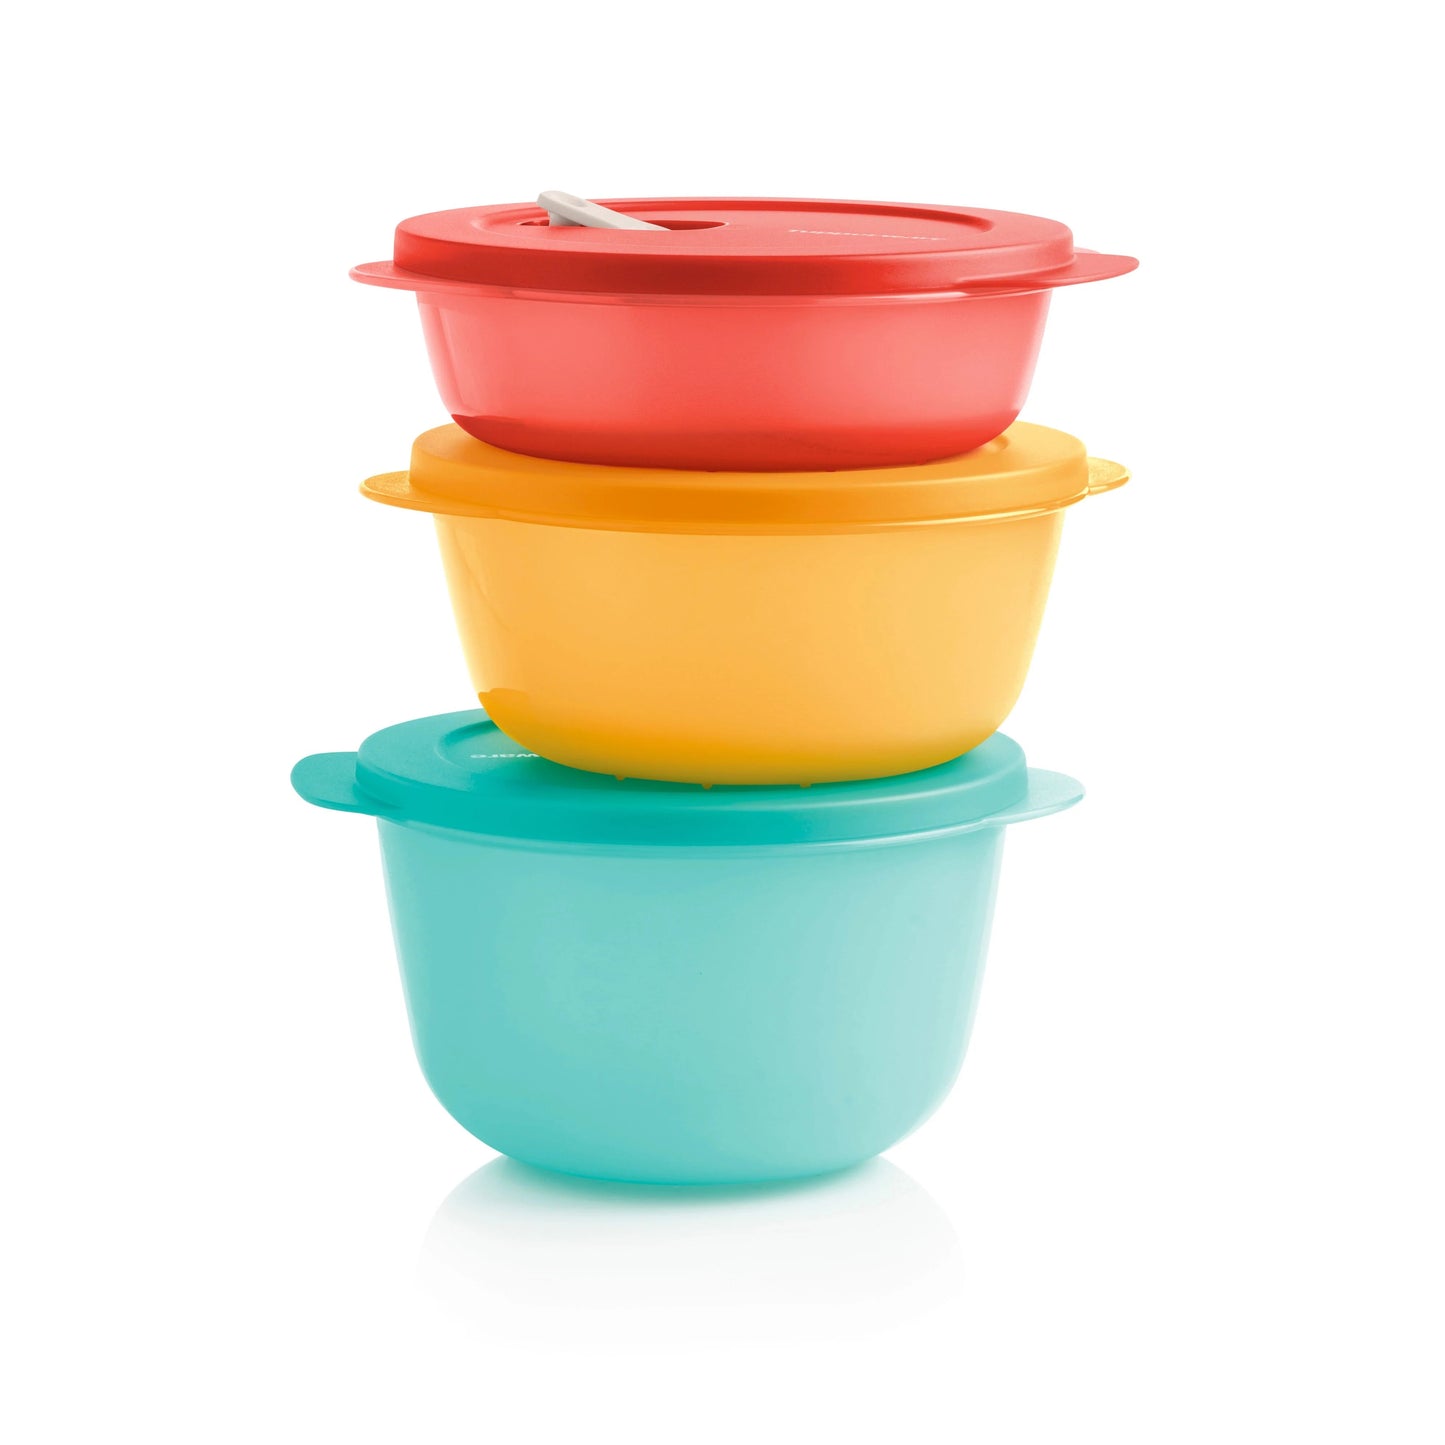 Tupperware CrystalWave Microwave 3.5 Cup Round Container Cristal Flash teal